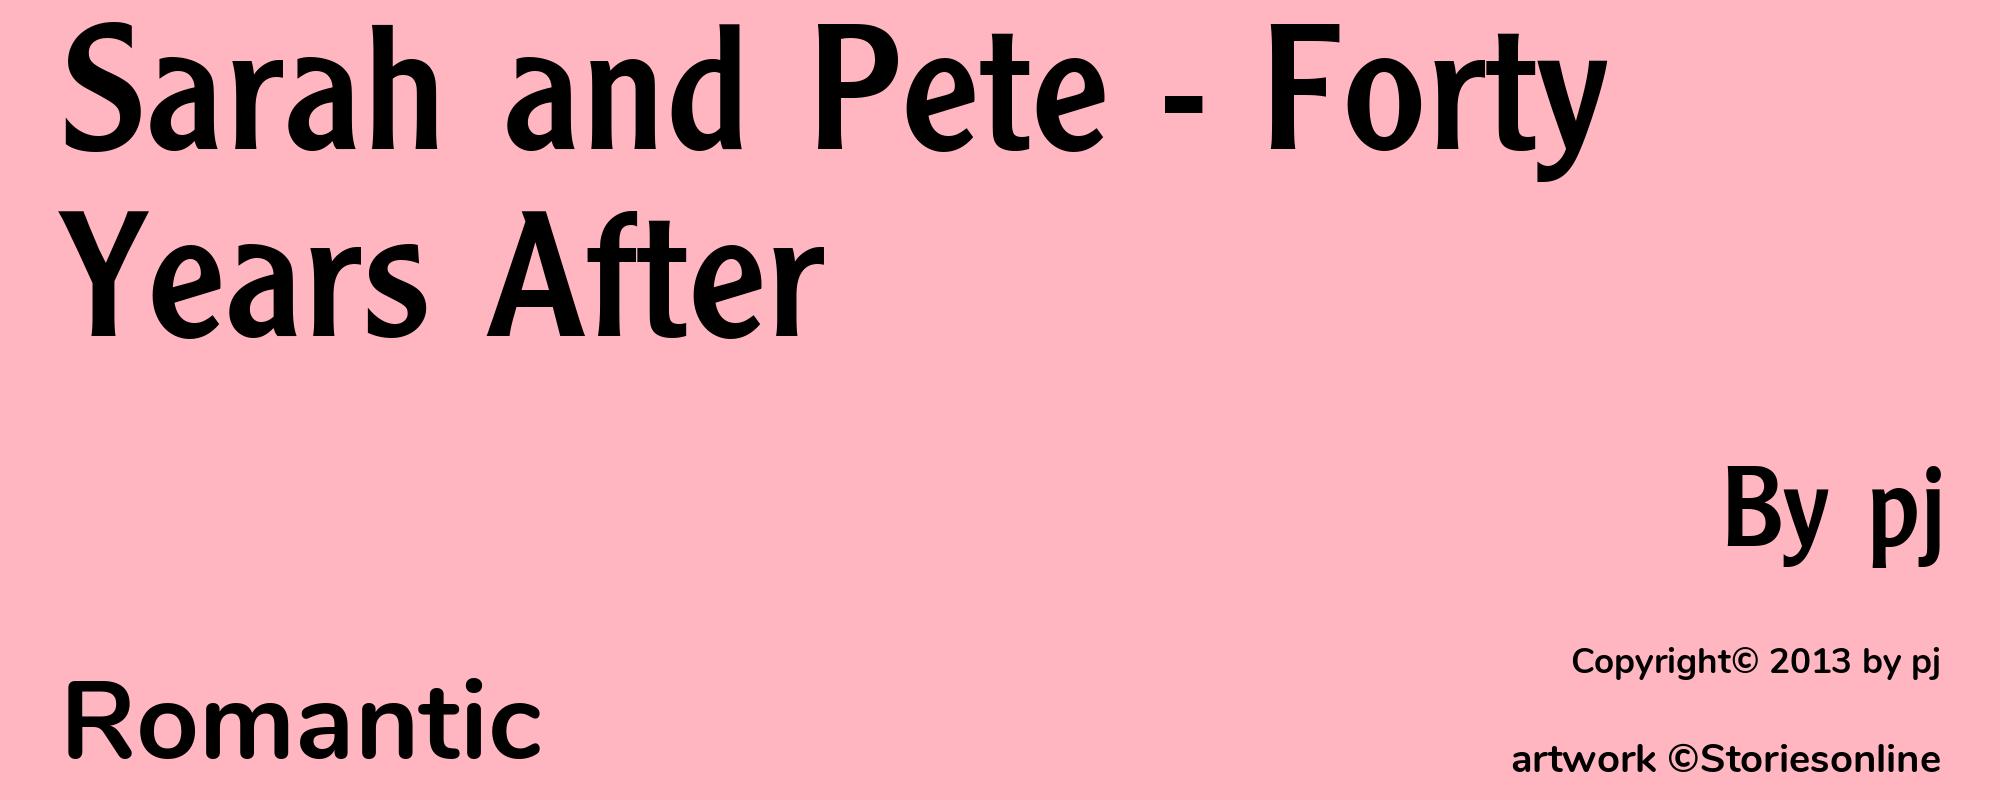 Sarah and Pete - Forty Years After - Cover